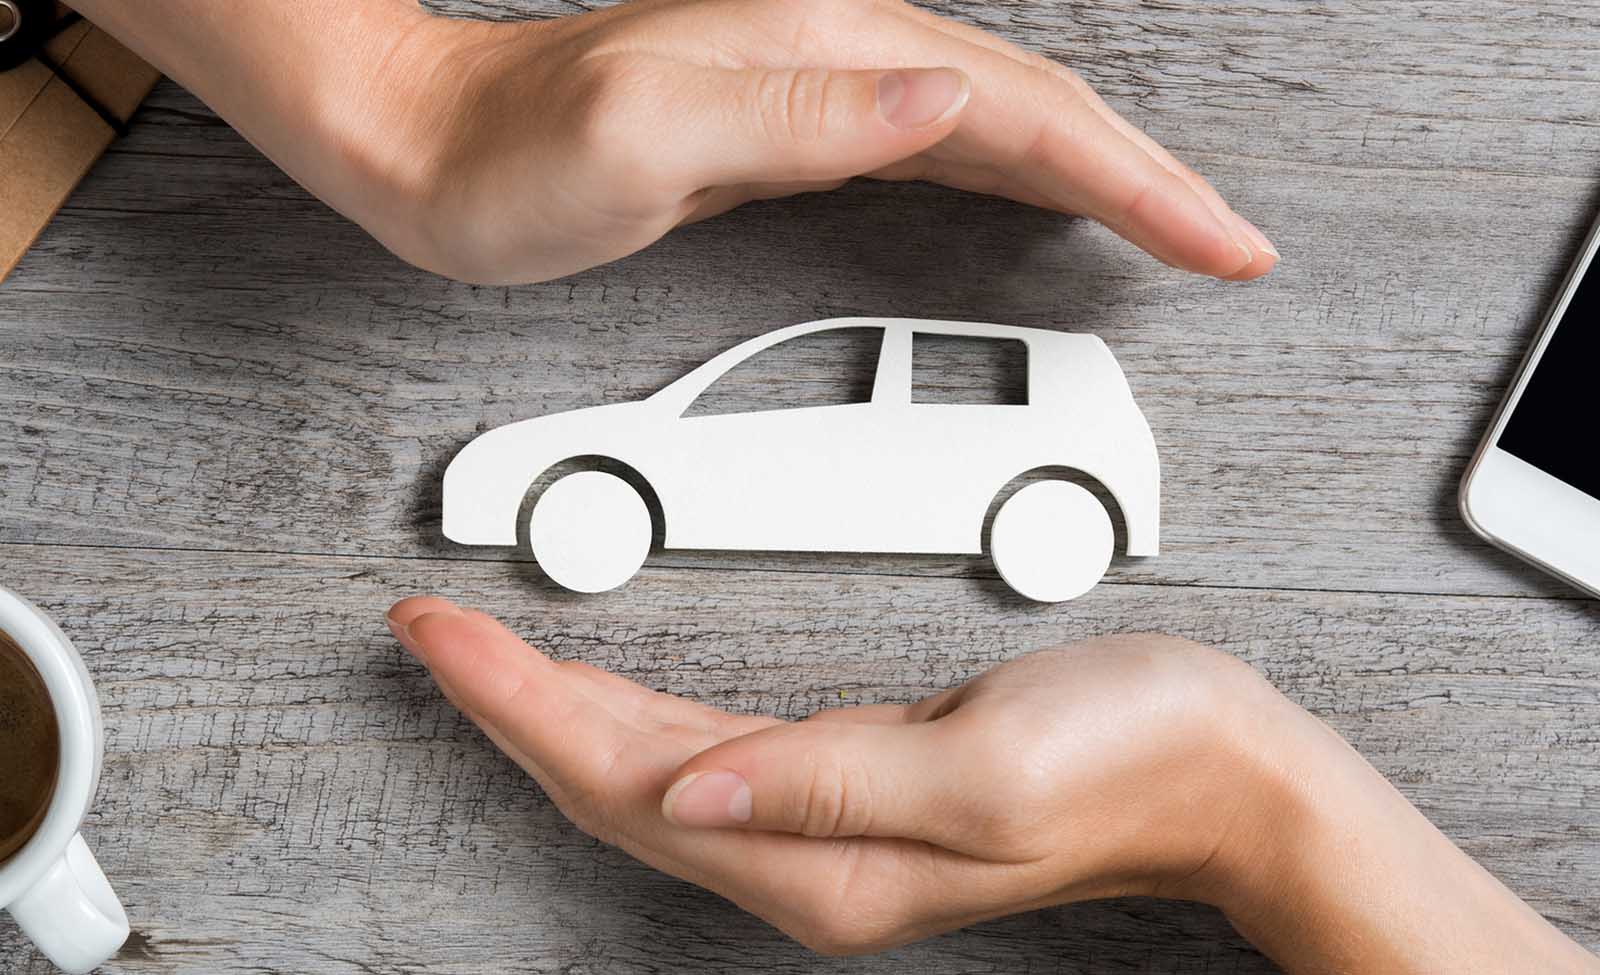 Gap or new car insurance compare the pros and cons of each one